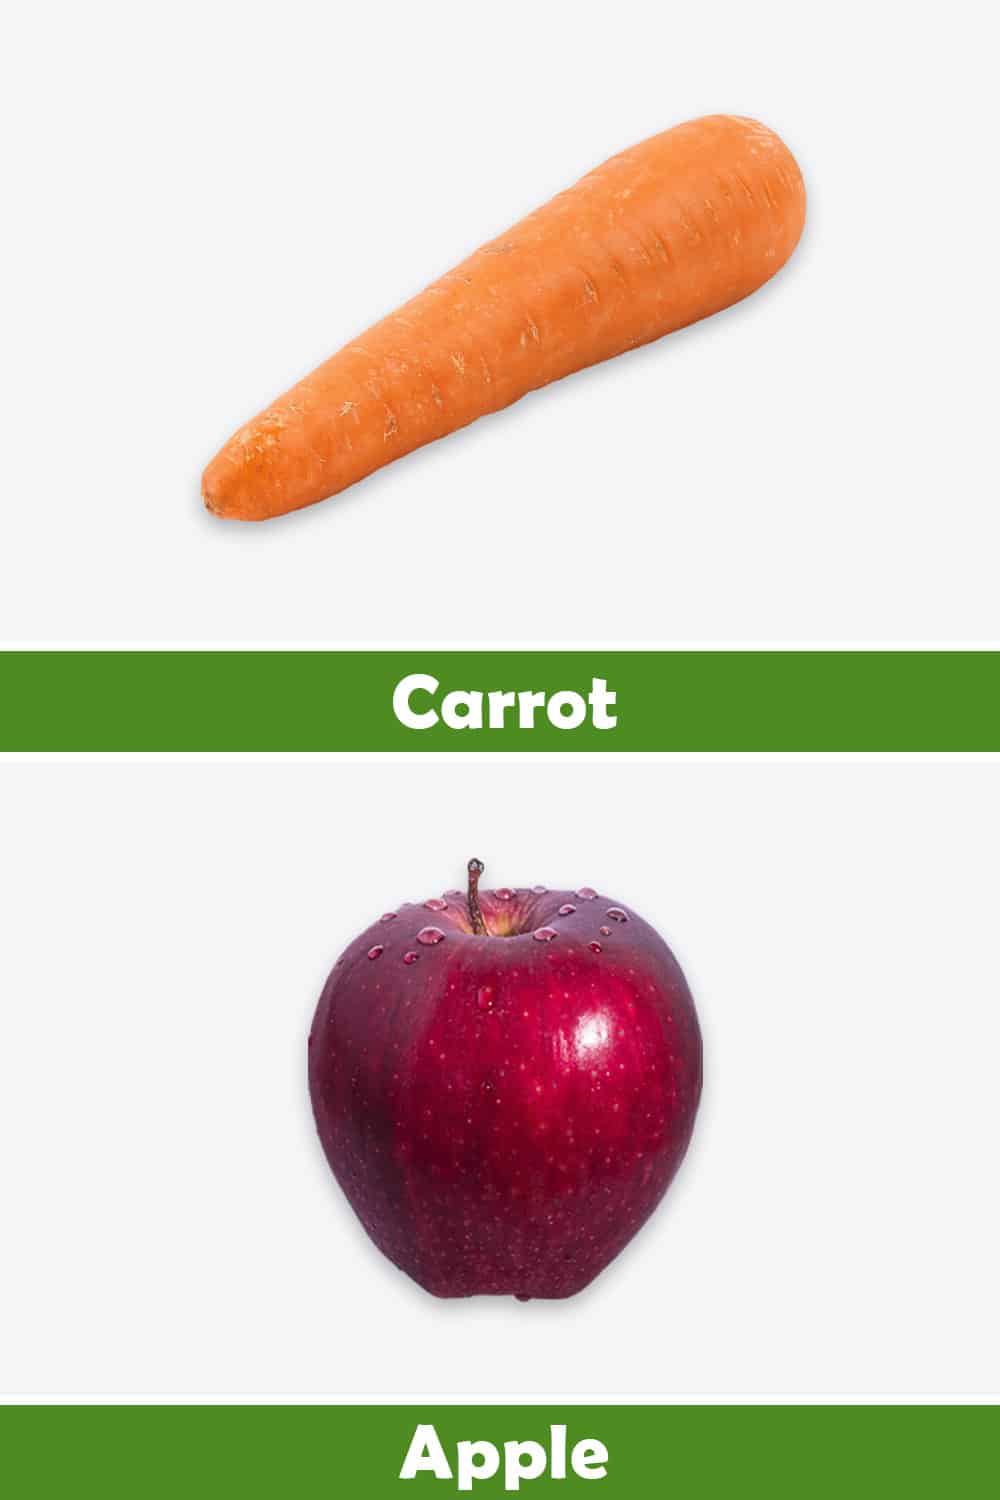 CARROT AND APPLE